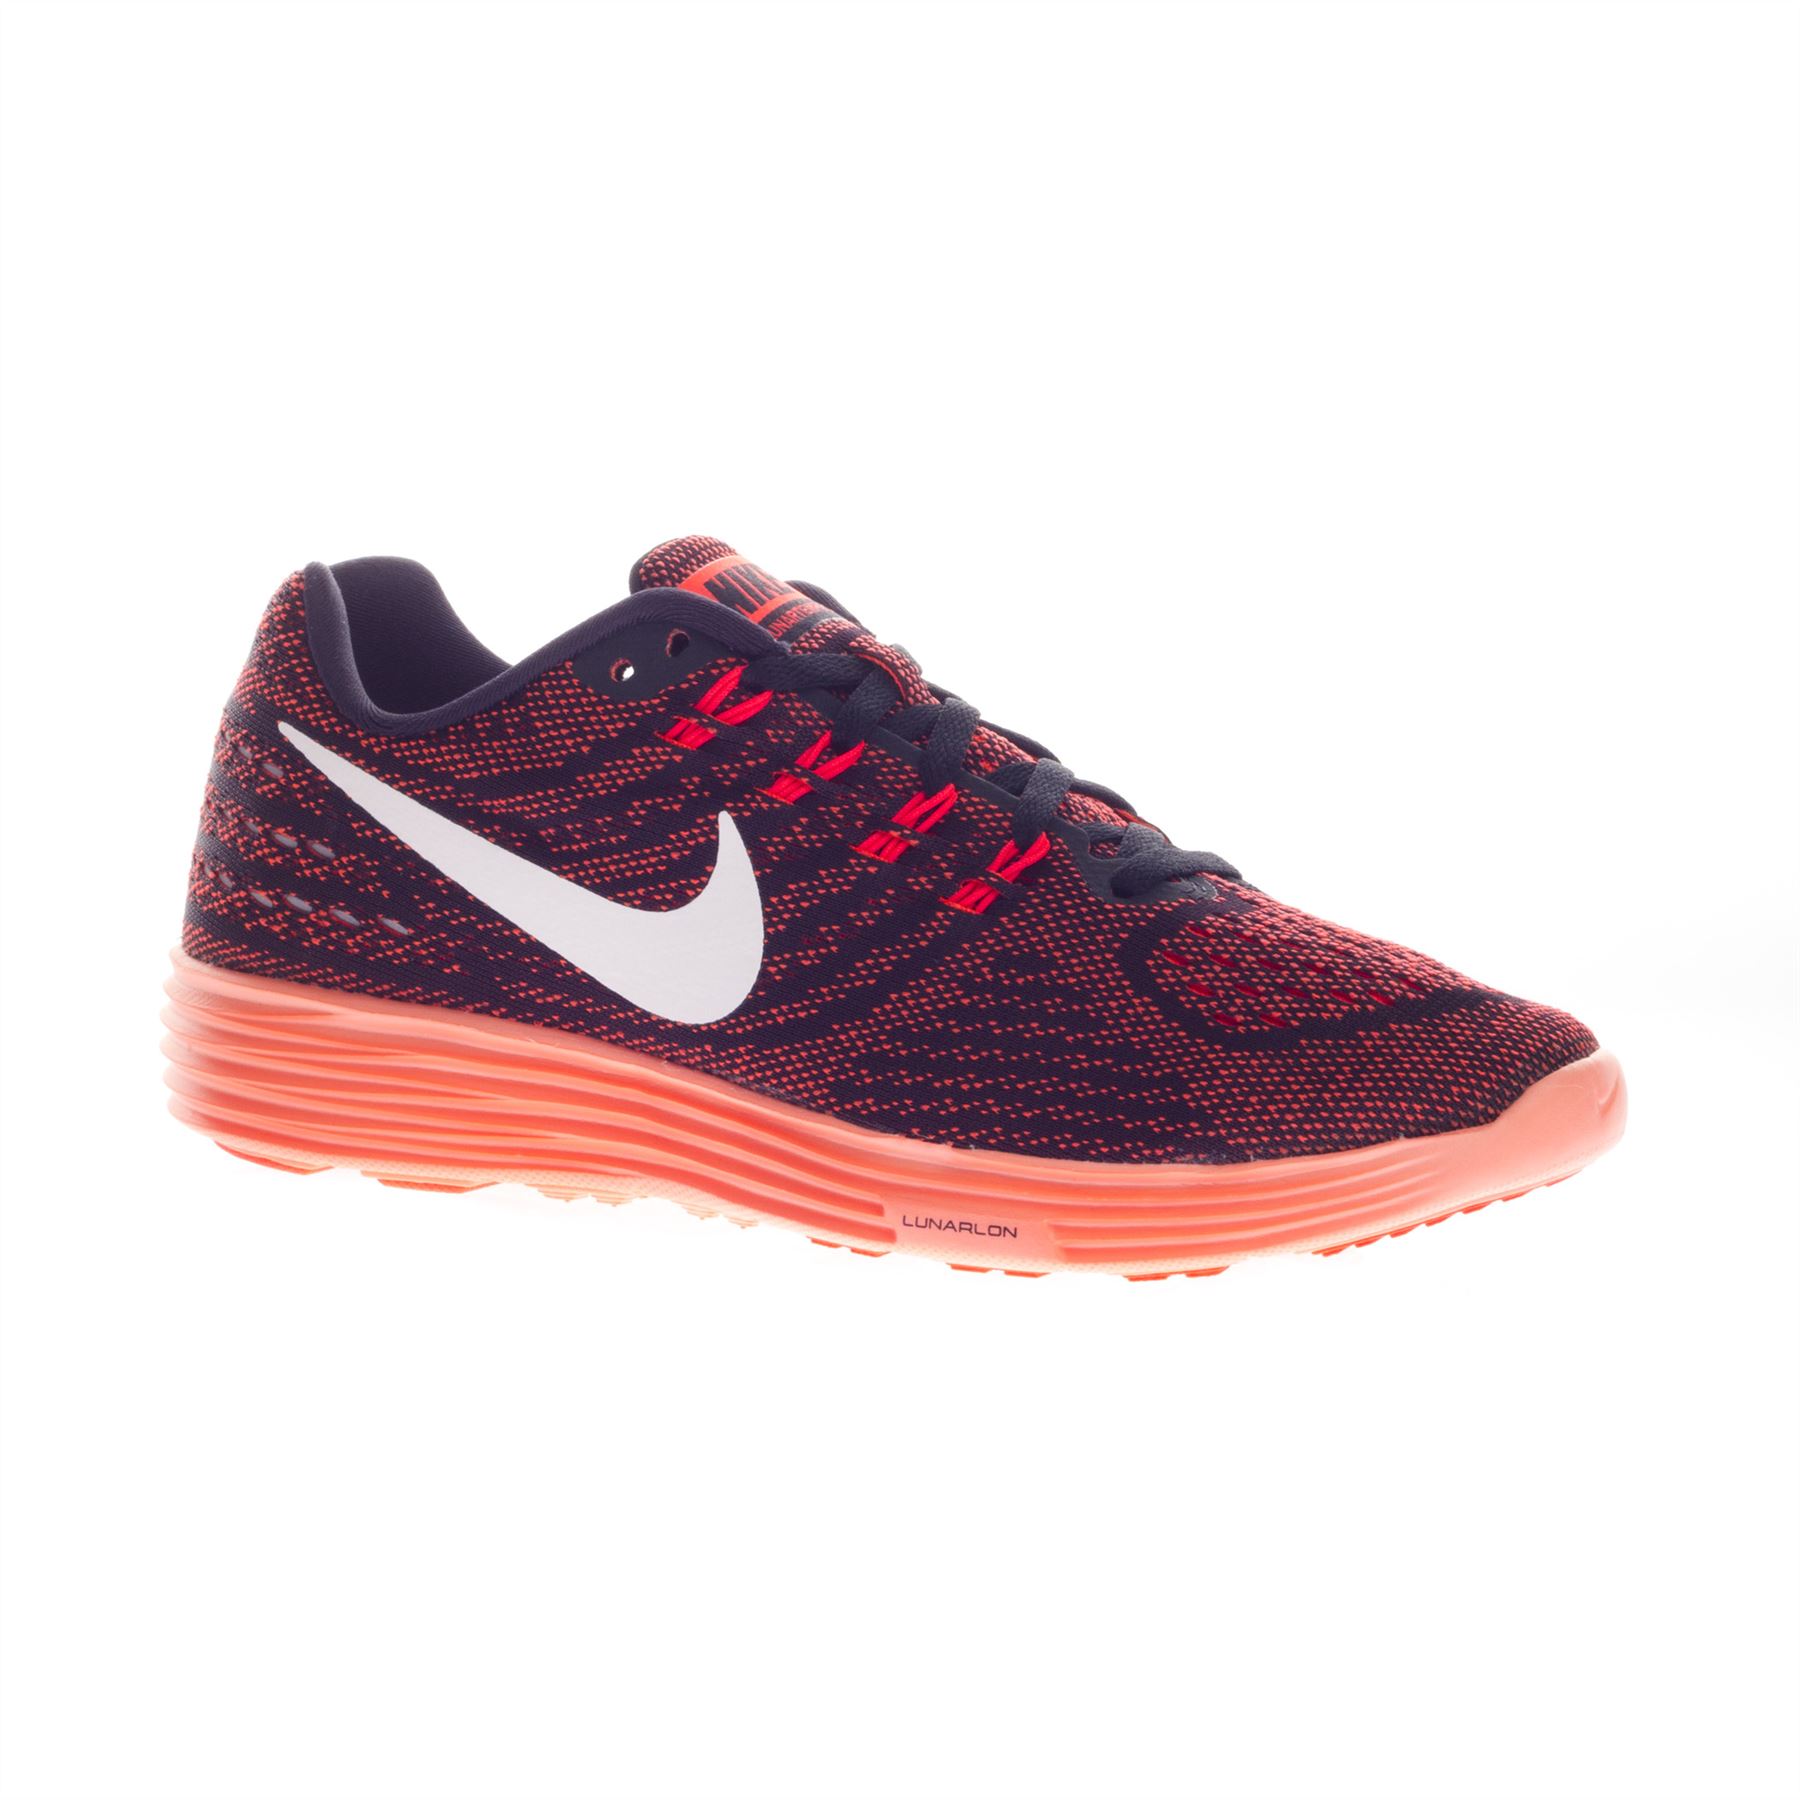 Nike Women's LunarTempo 2 Low Top Gym Running Trainers